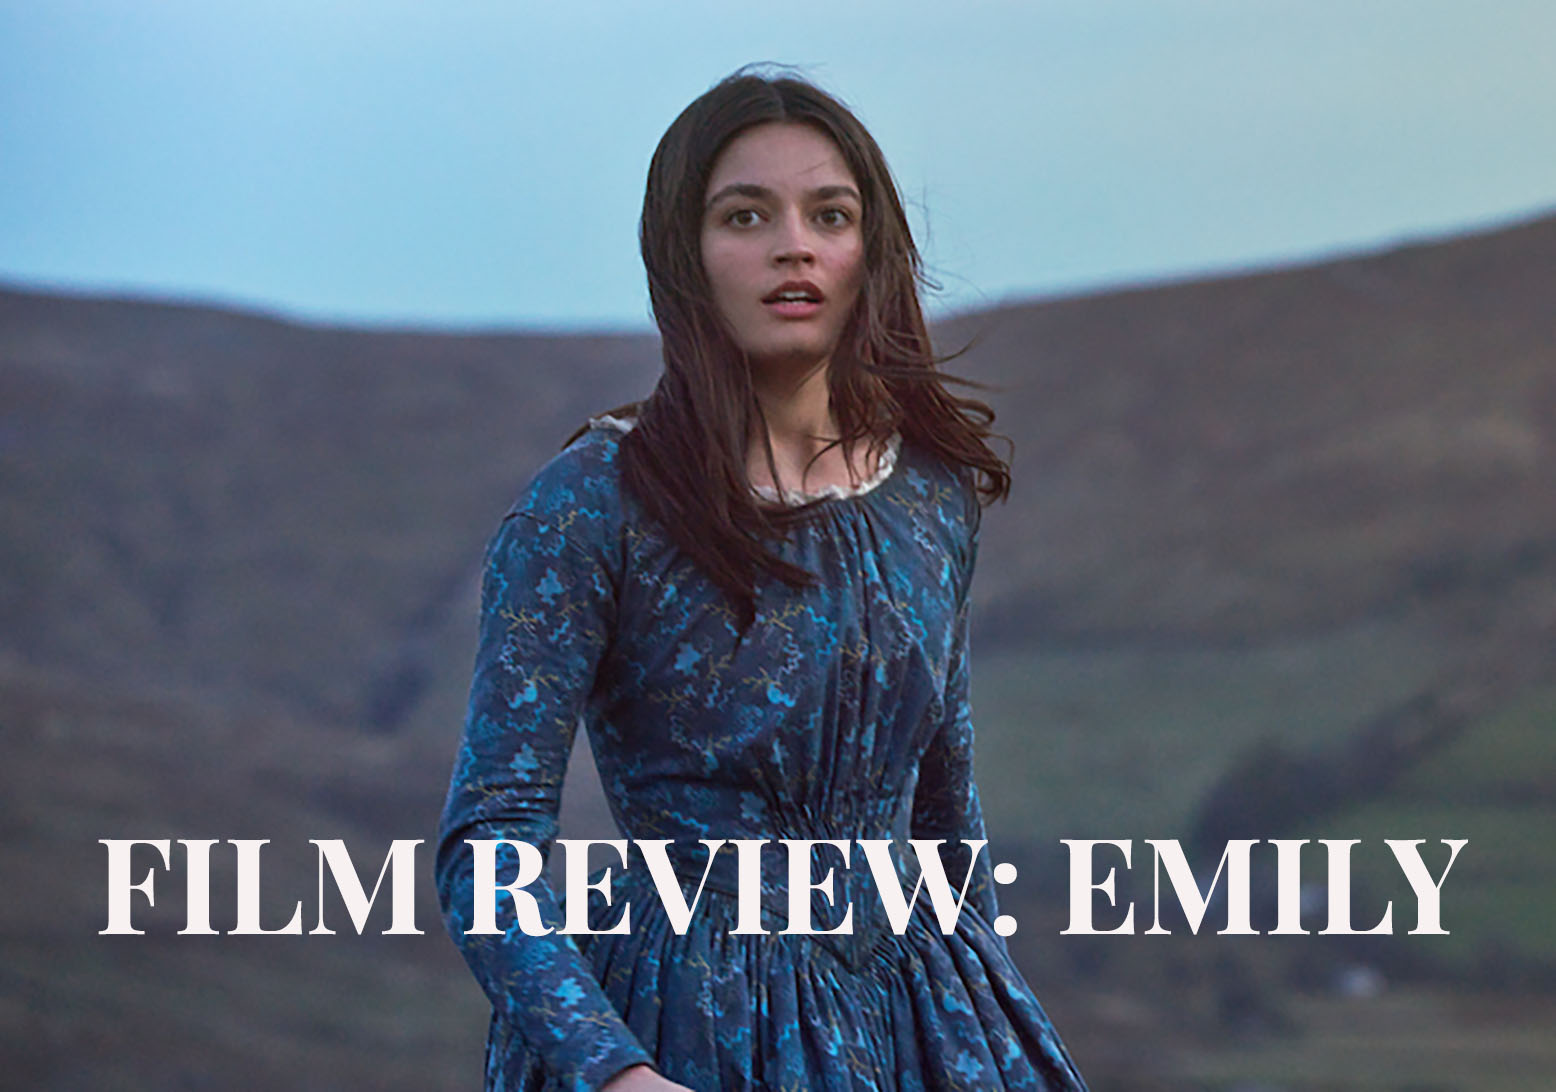 movie review for emily